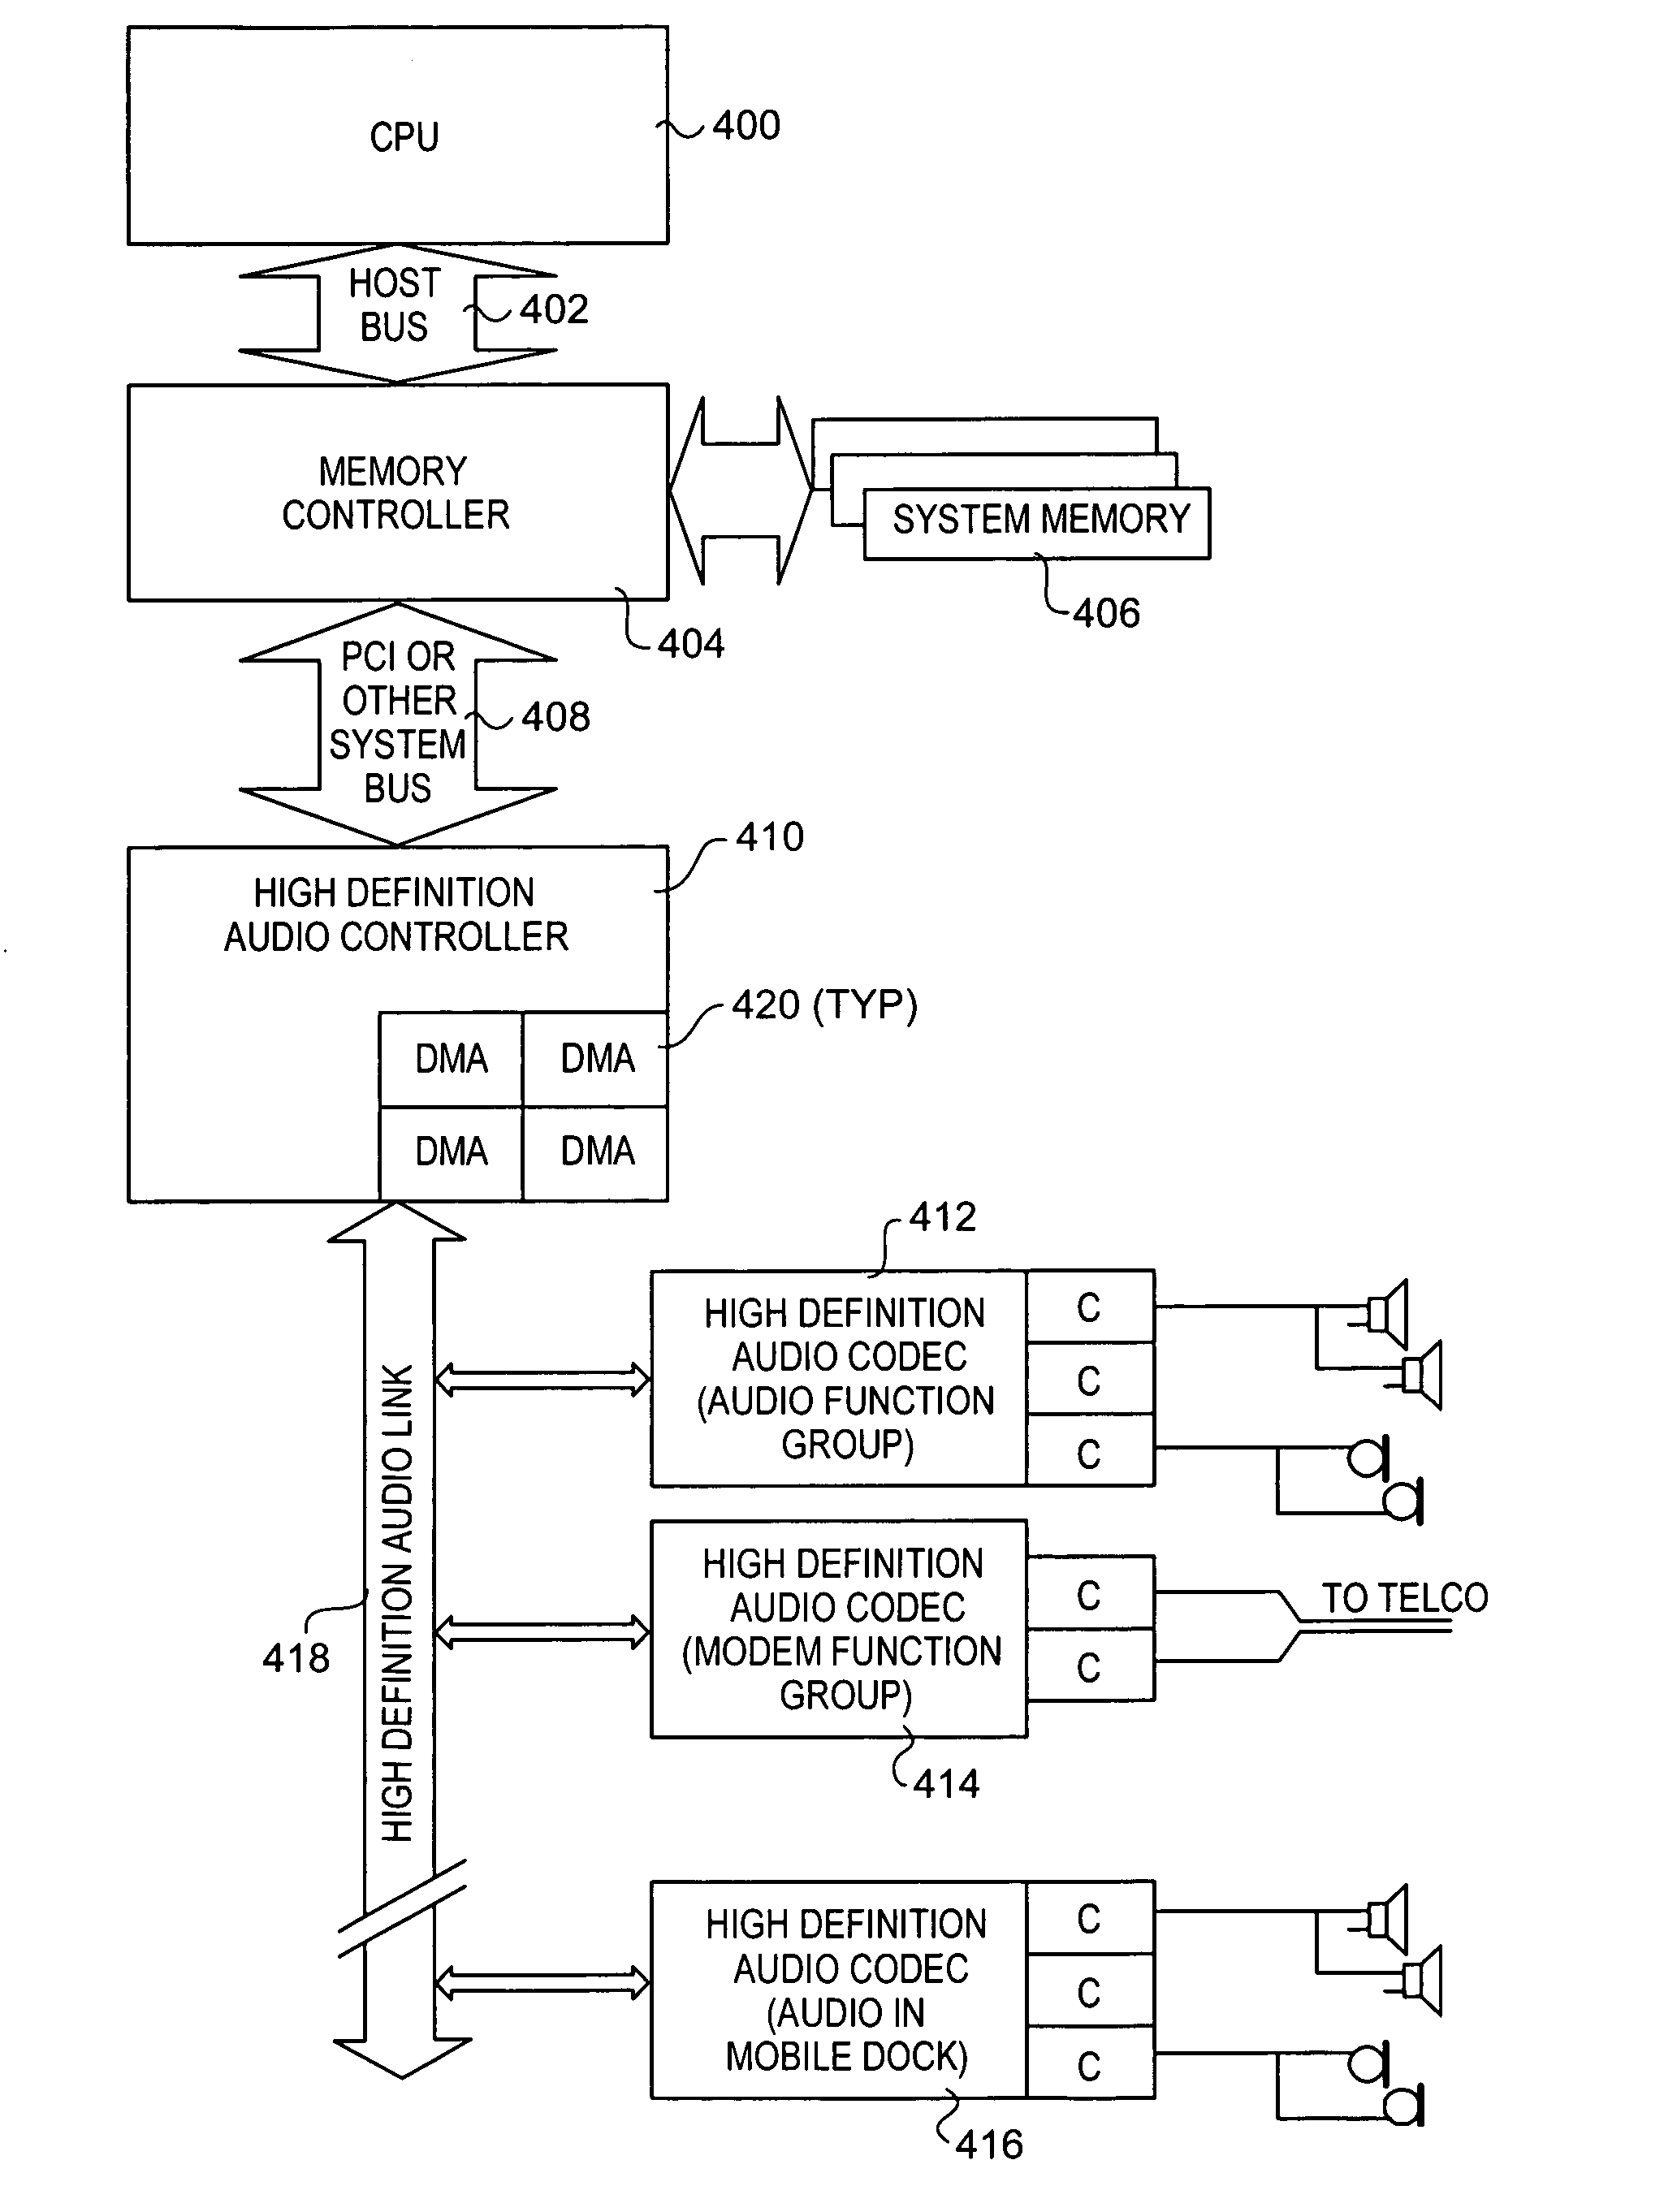 Method and apparatus for providing remote audio